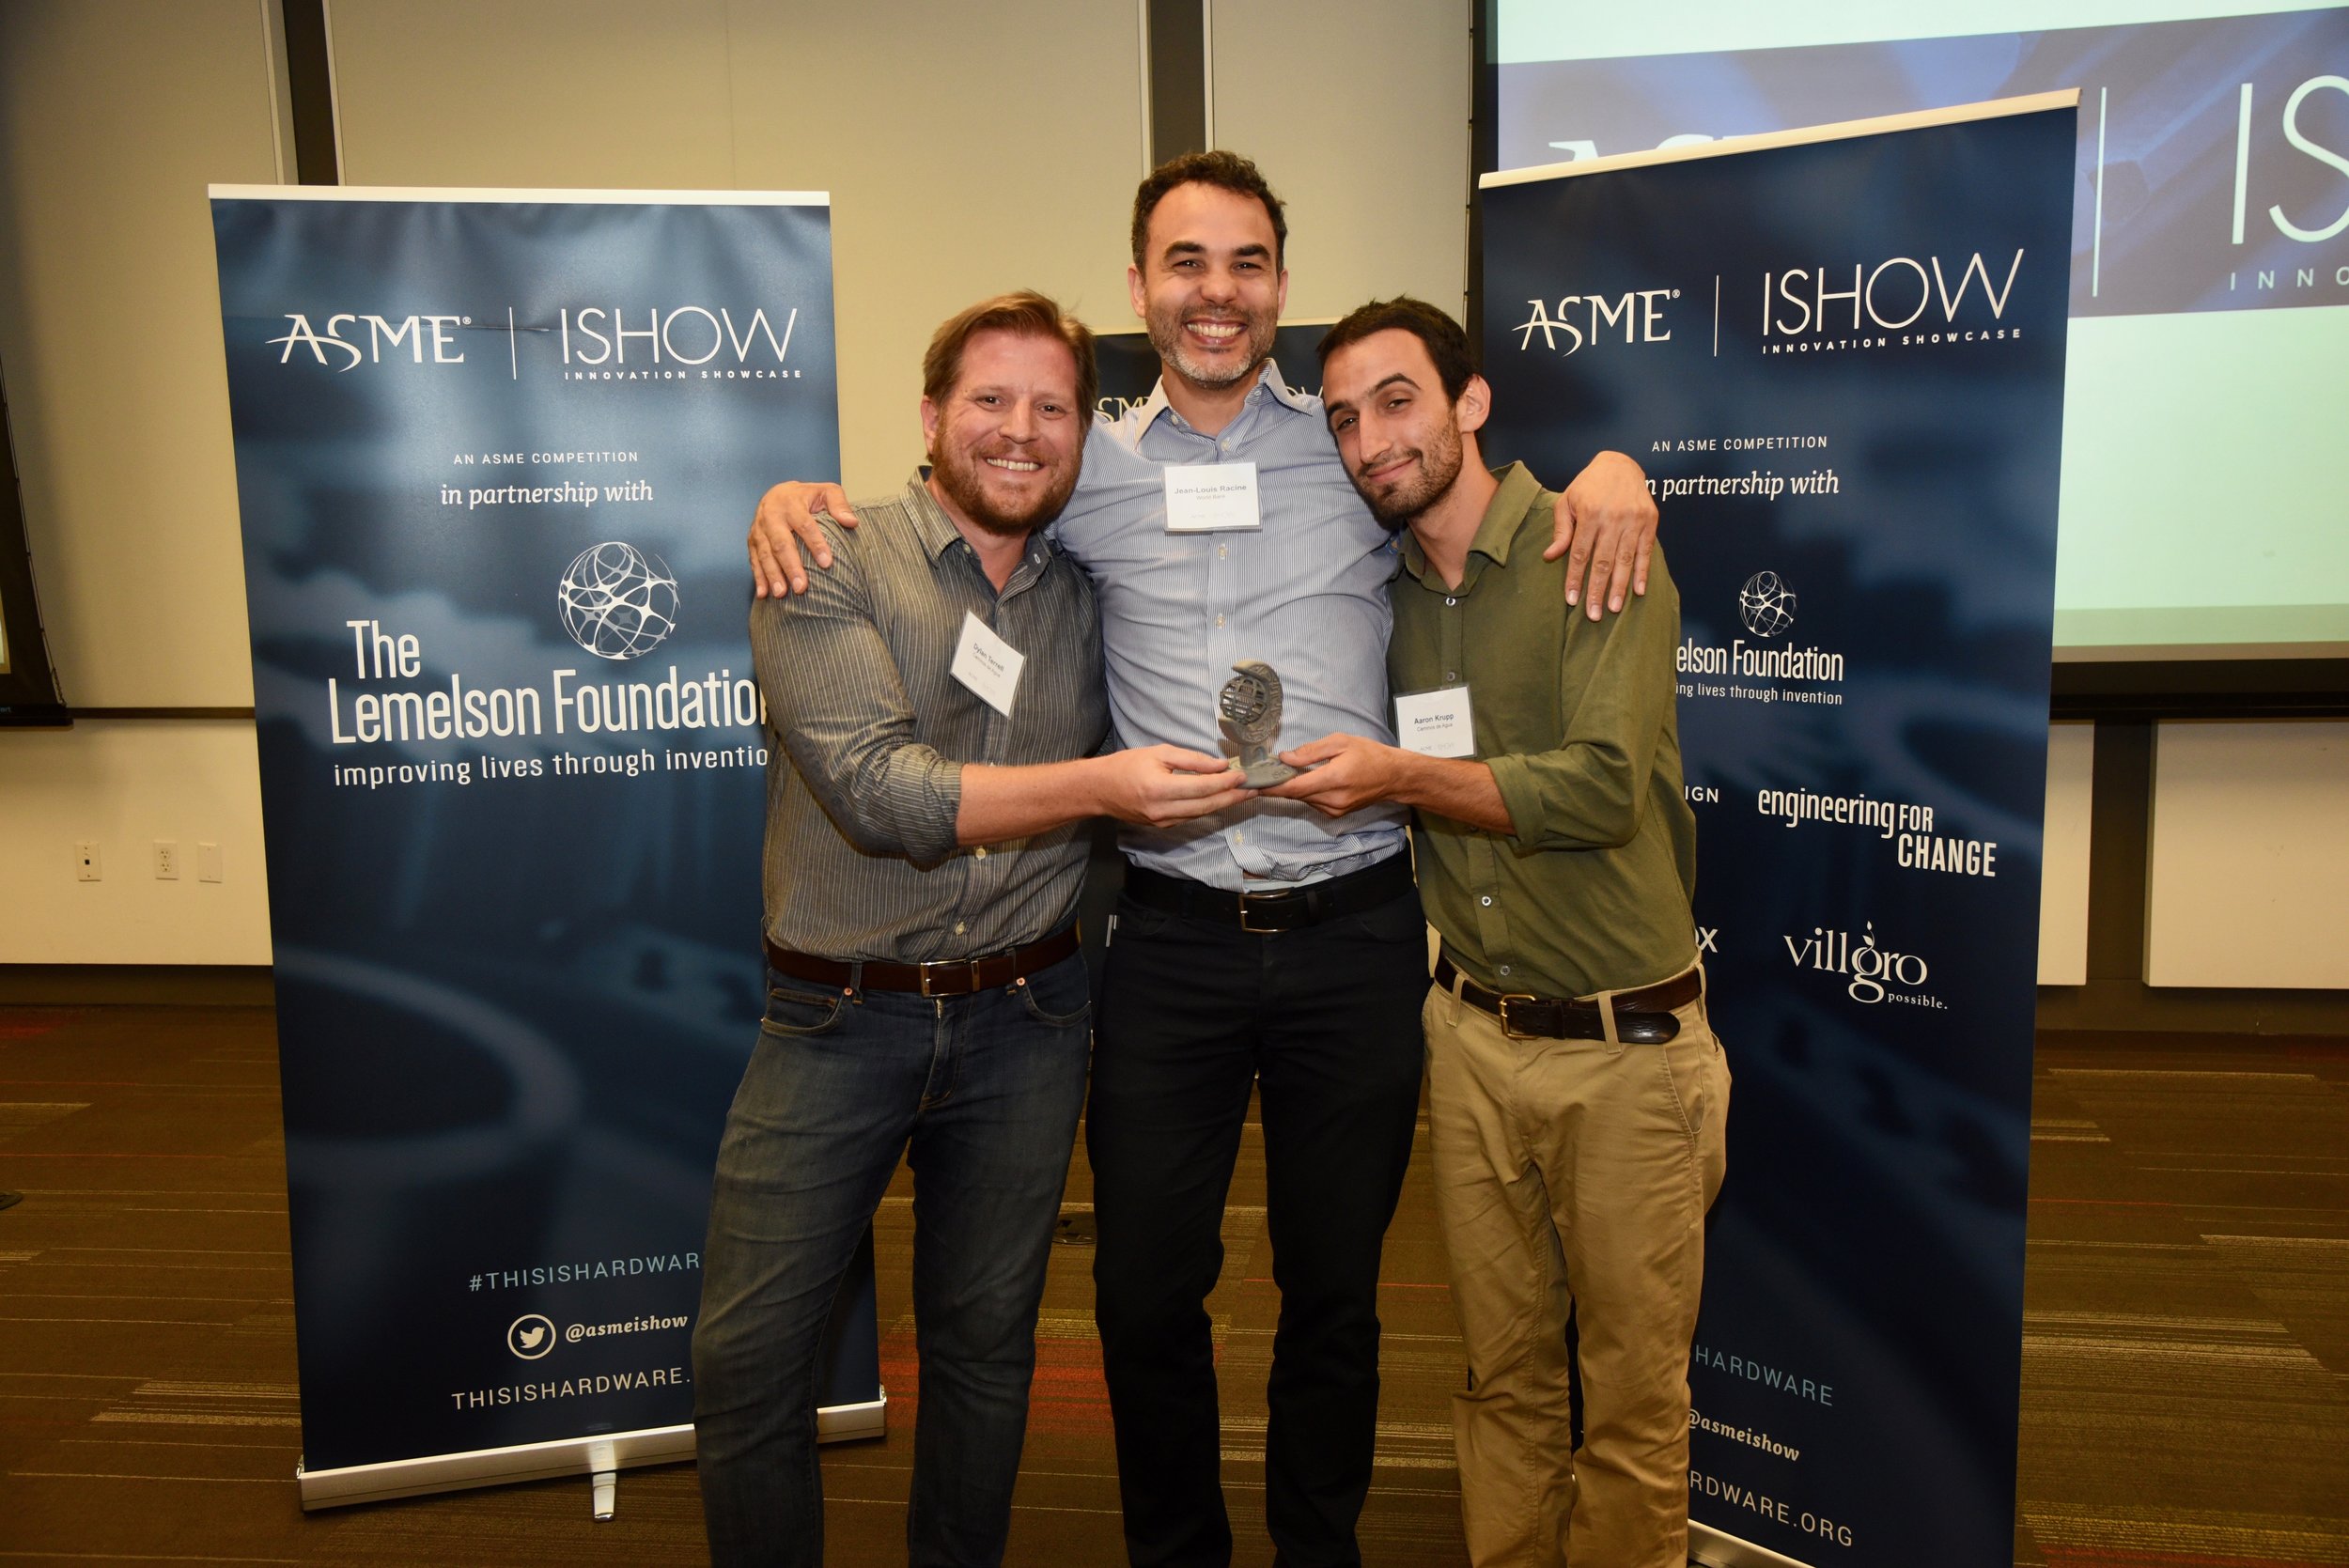  Aaron and Dylan receiving the “ISHOW” award from Jean-Louis Racine – head of the Climate Technology Program at the World Bank.  Aaron y Dylan reciben el premio “ISHOW” de Jean-Louis Racine, director del Programa de Tecnología del Clima del Banco Mun